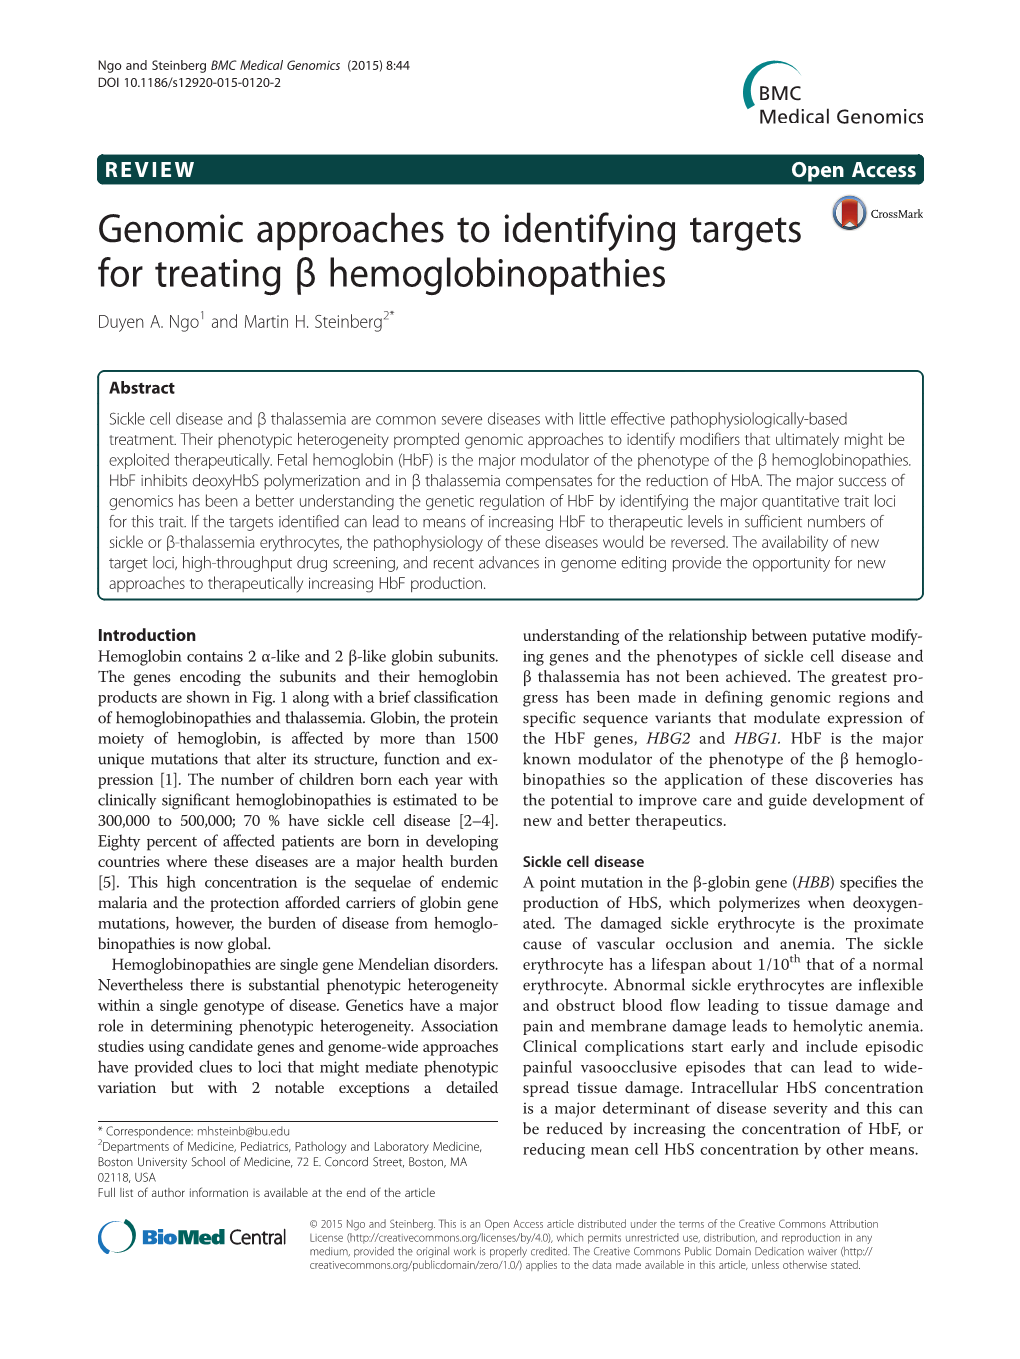 Genomic Approaches to Identifying Targets for Treating Β Hemoglobinopathies Duyen A